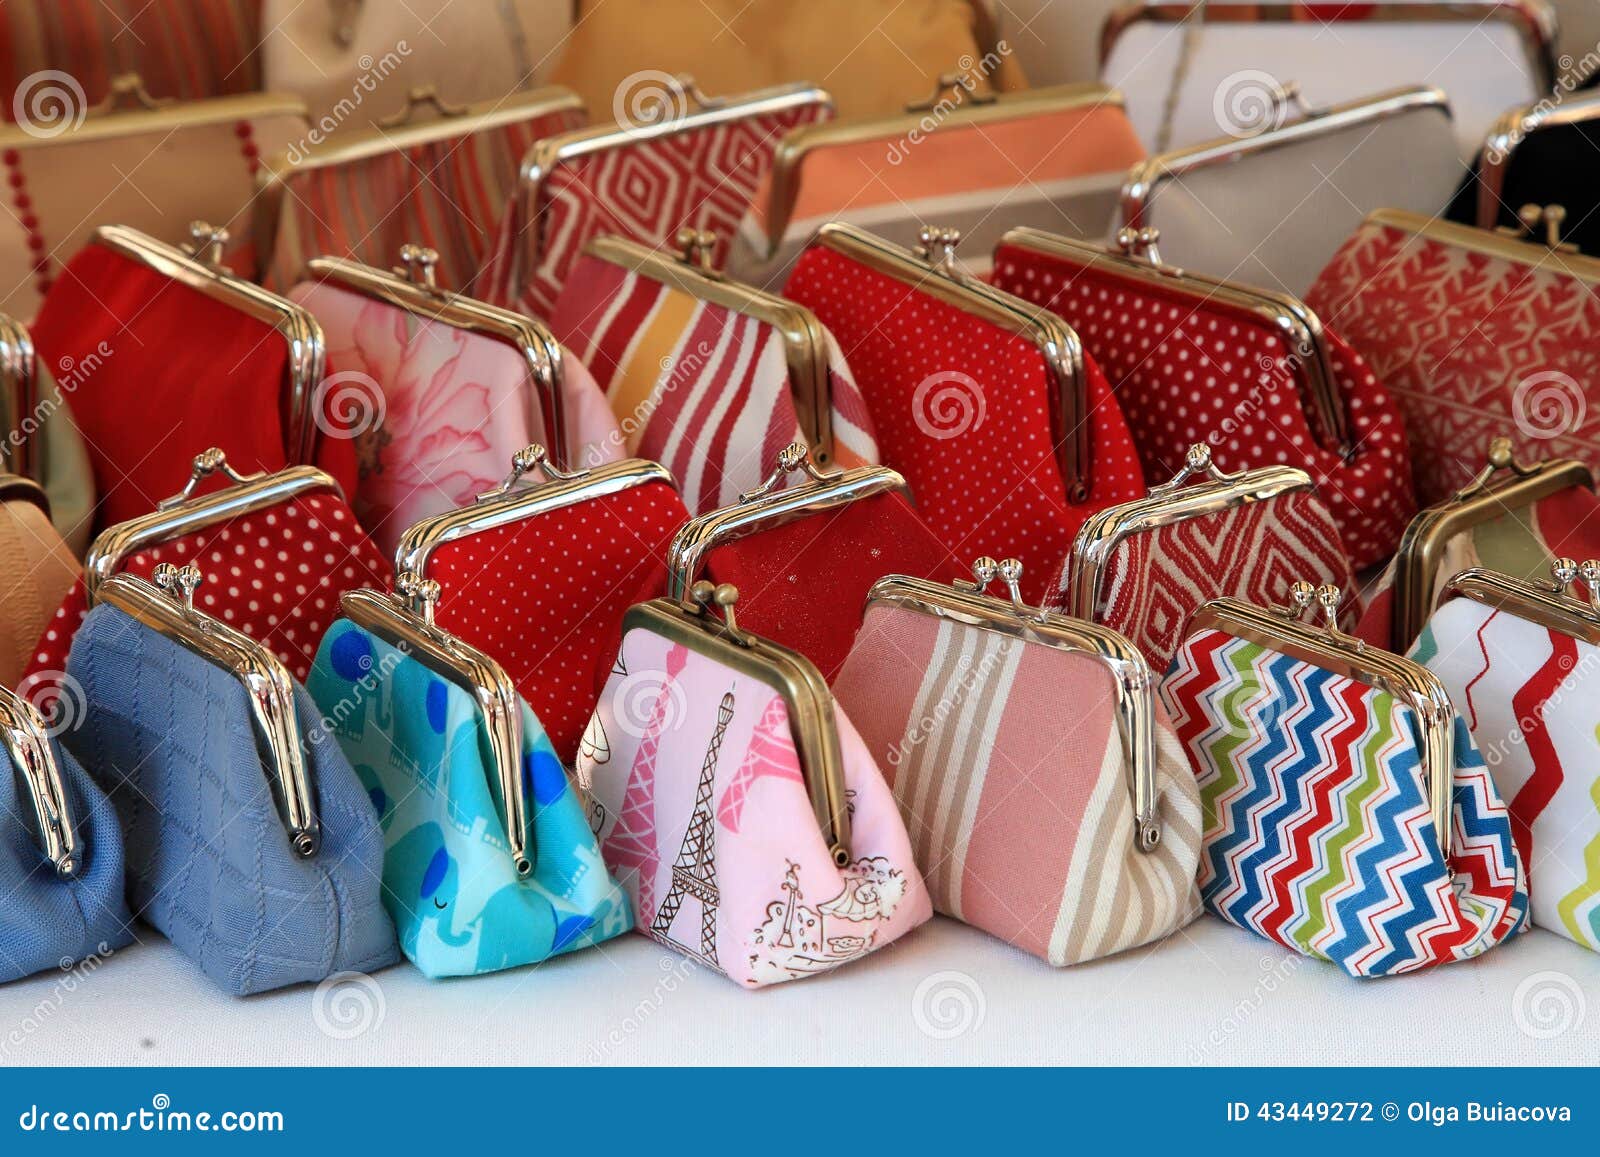 Lots of bags stock image. Image of style, merchant, bags - 151677311